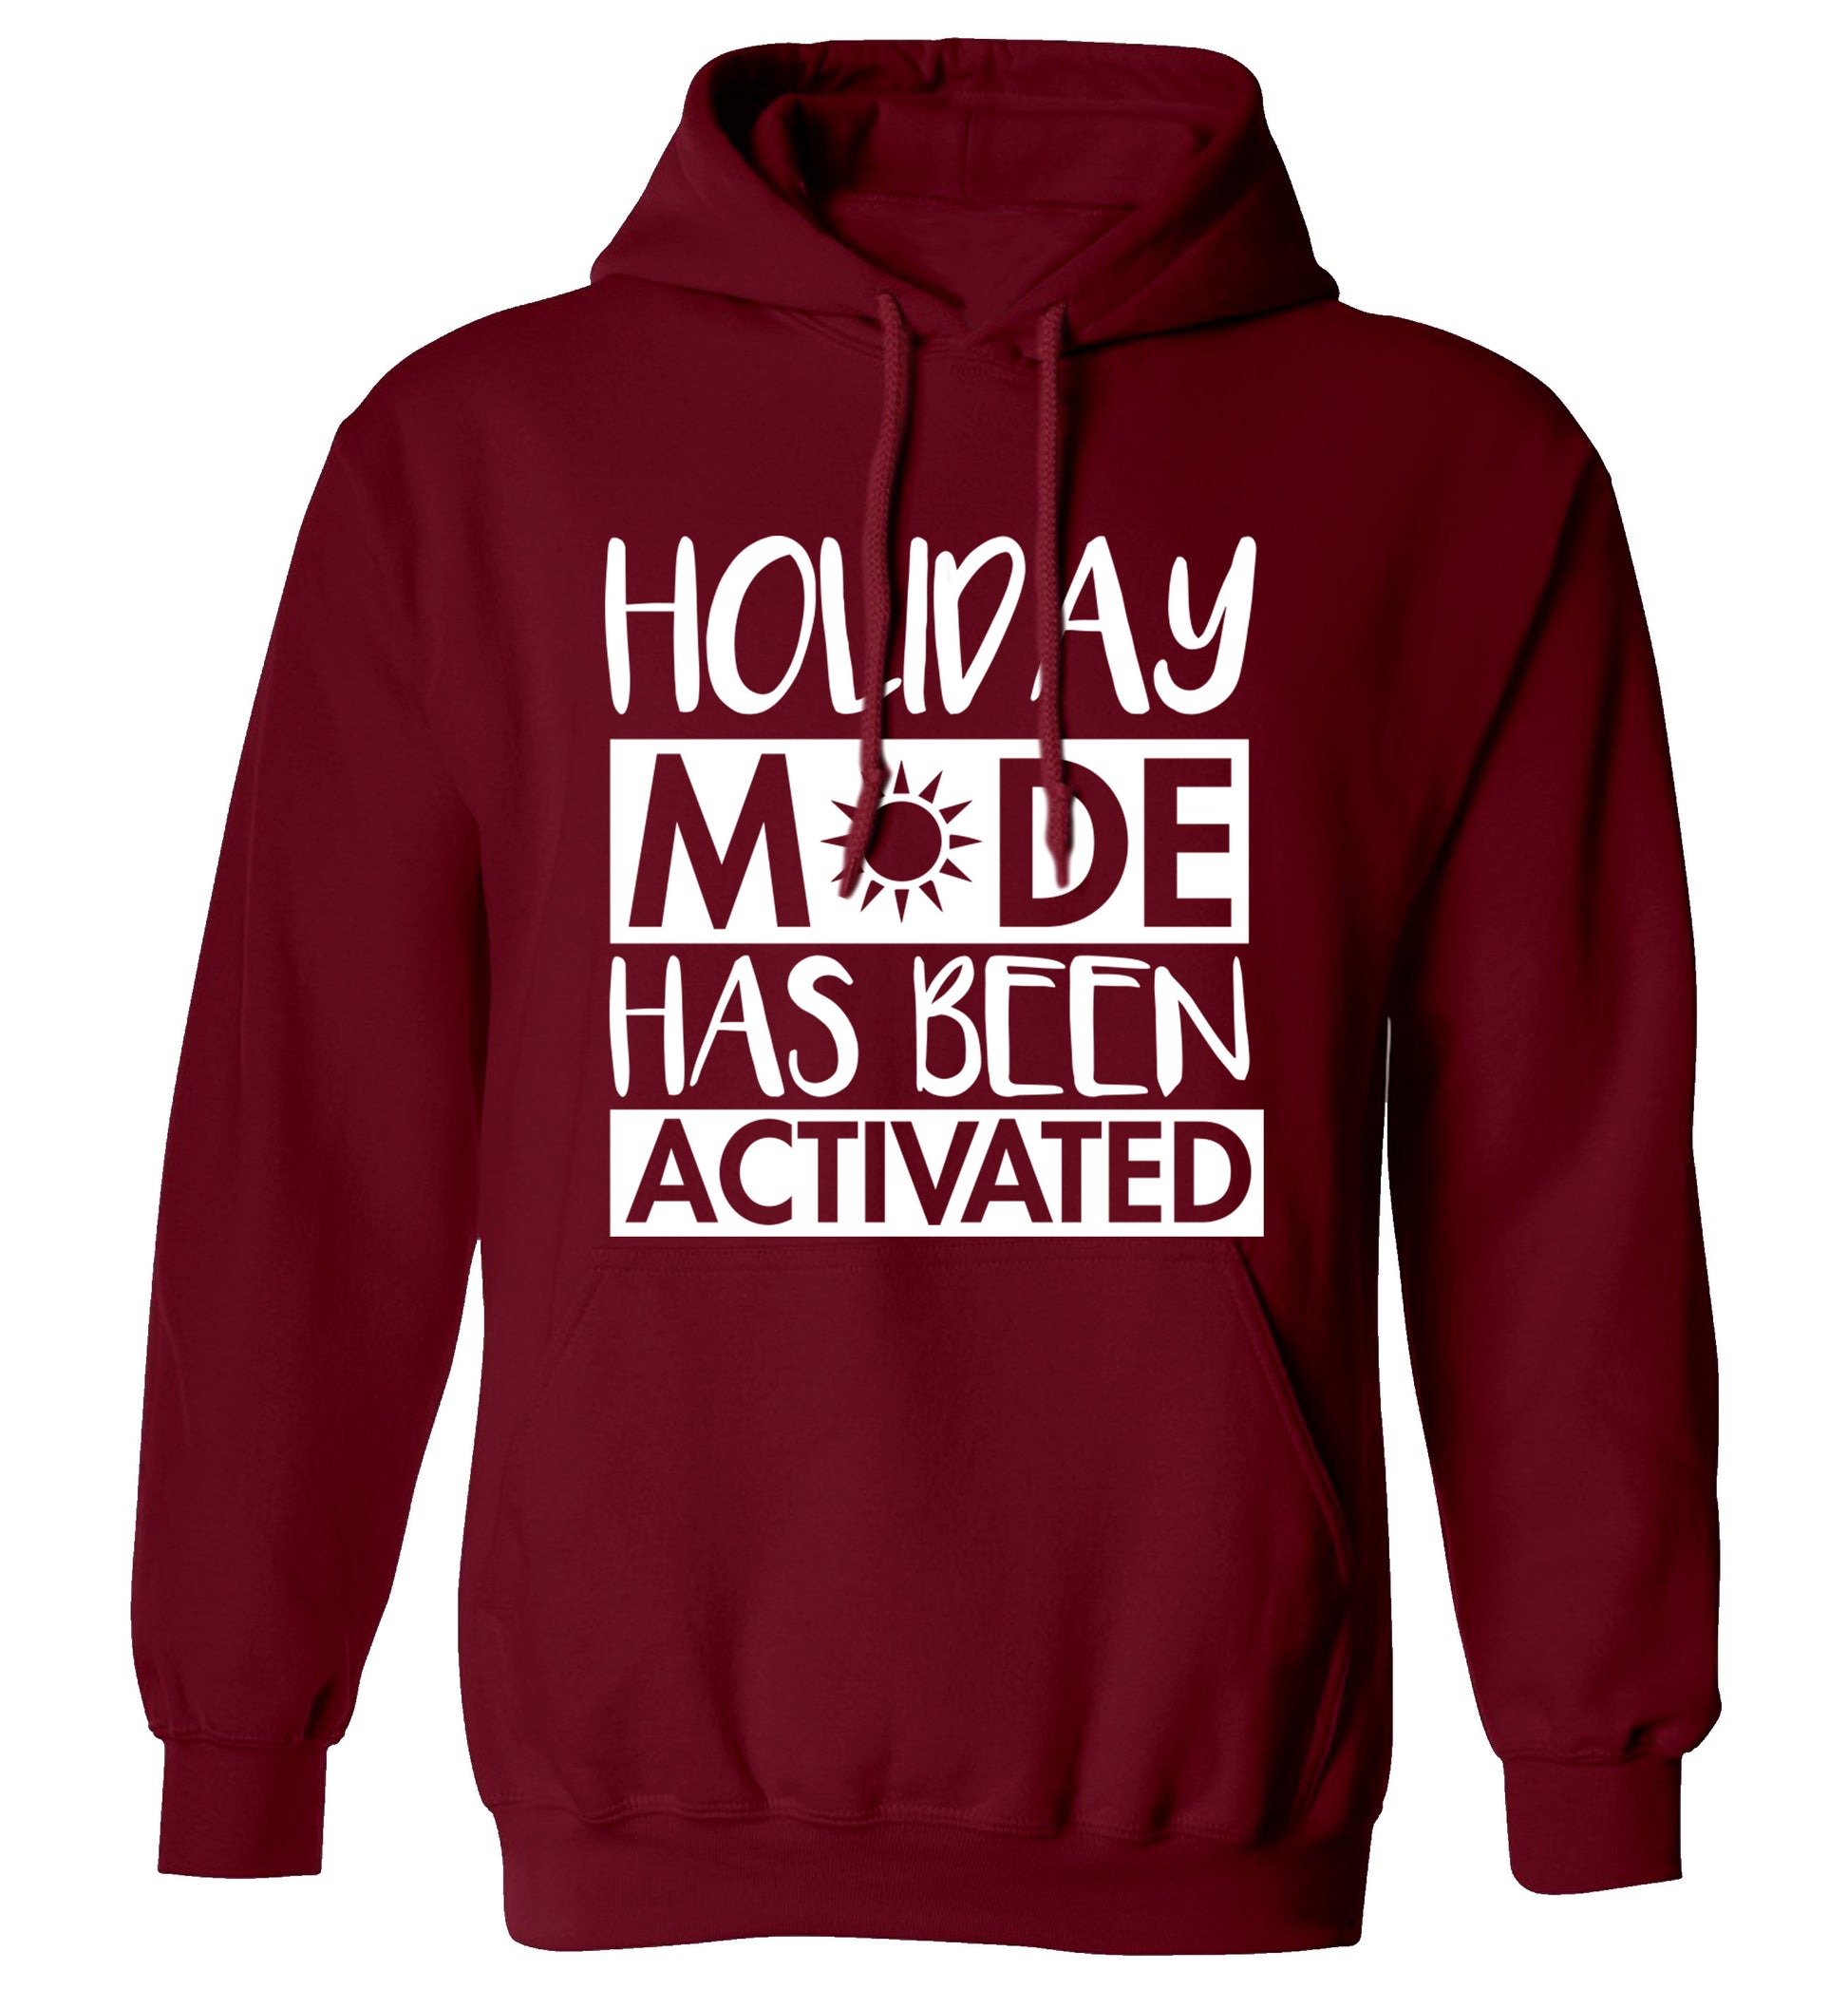 Holiday mode has been activated adults unisex maroon hoodie 2XL